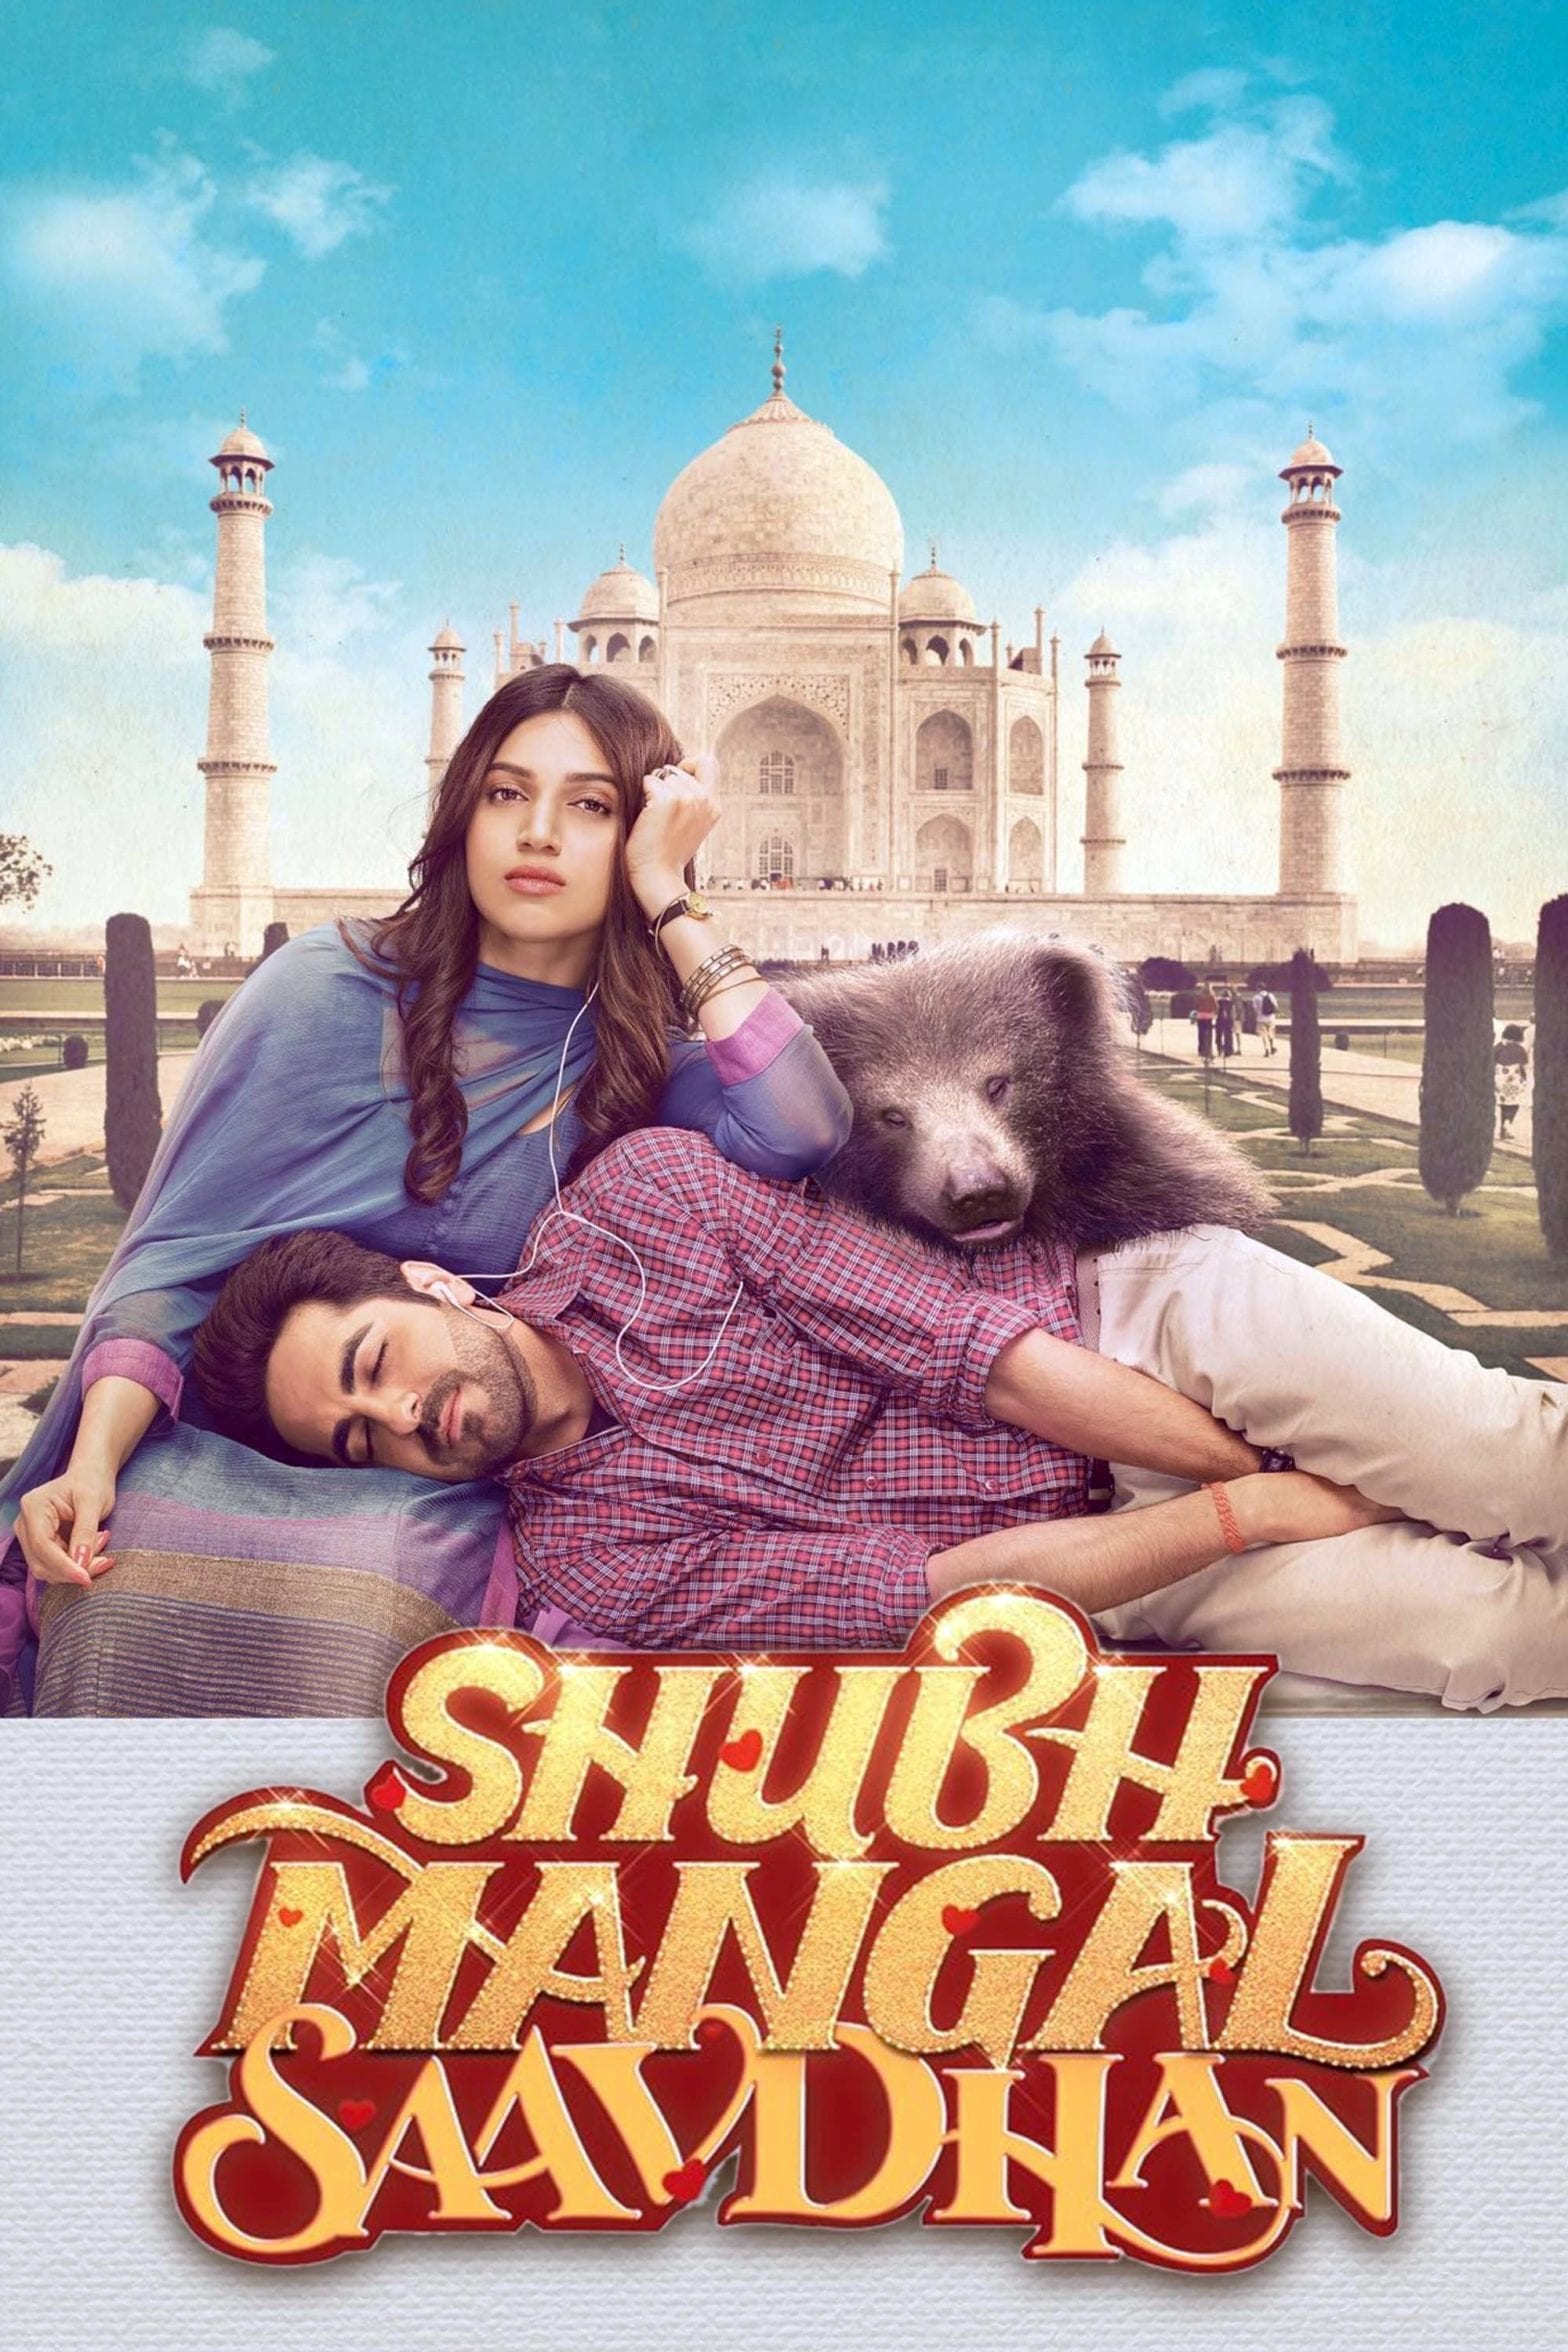 Poster for the movie "Shubh Mangal Saavdhan"